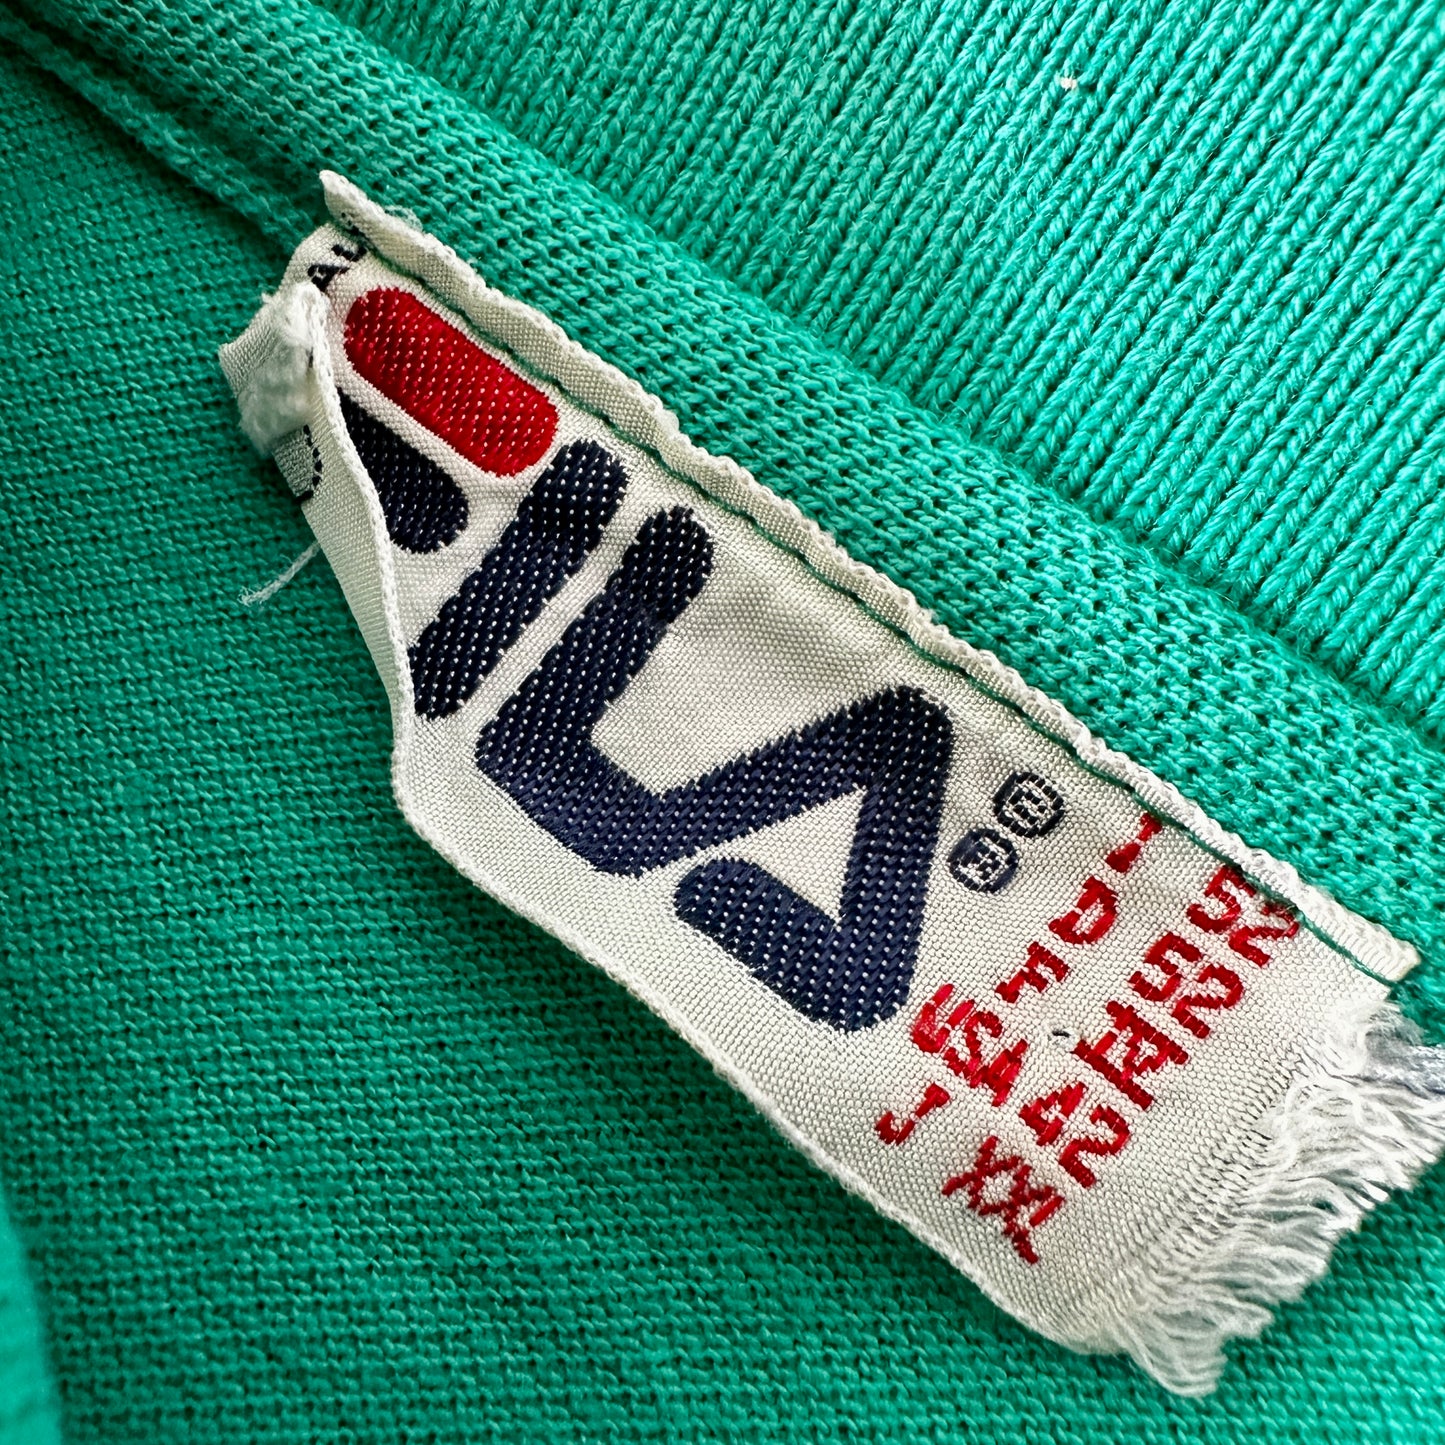 Fila Vintage 80s Polo Shirt - 52 / L - Made in Italy